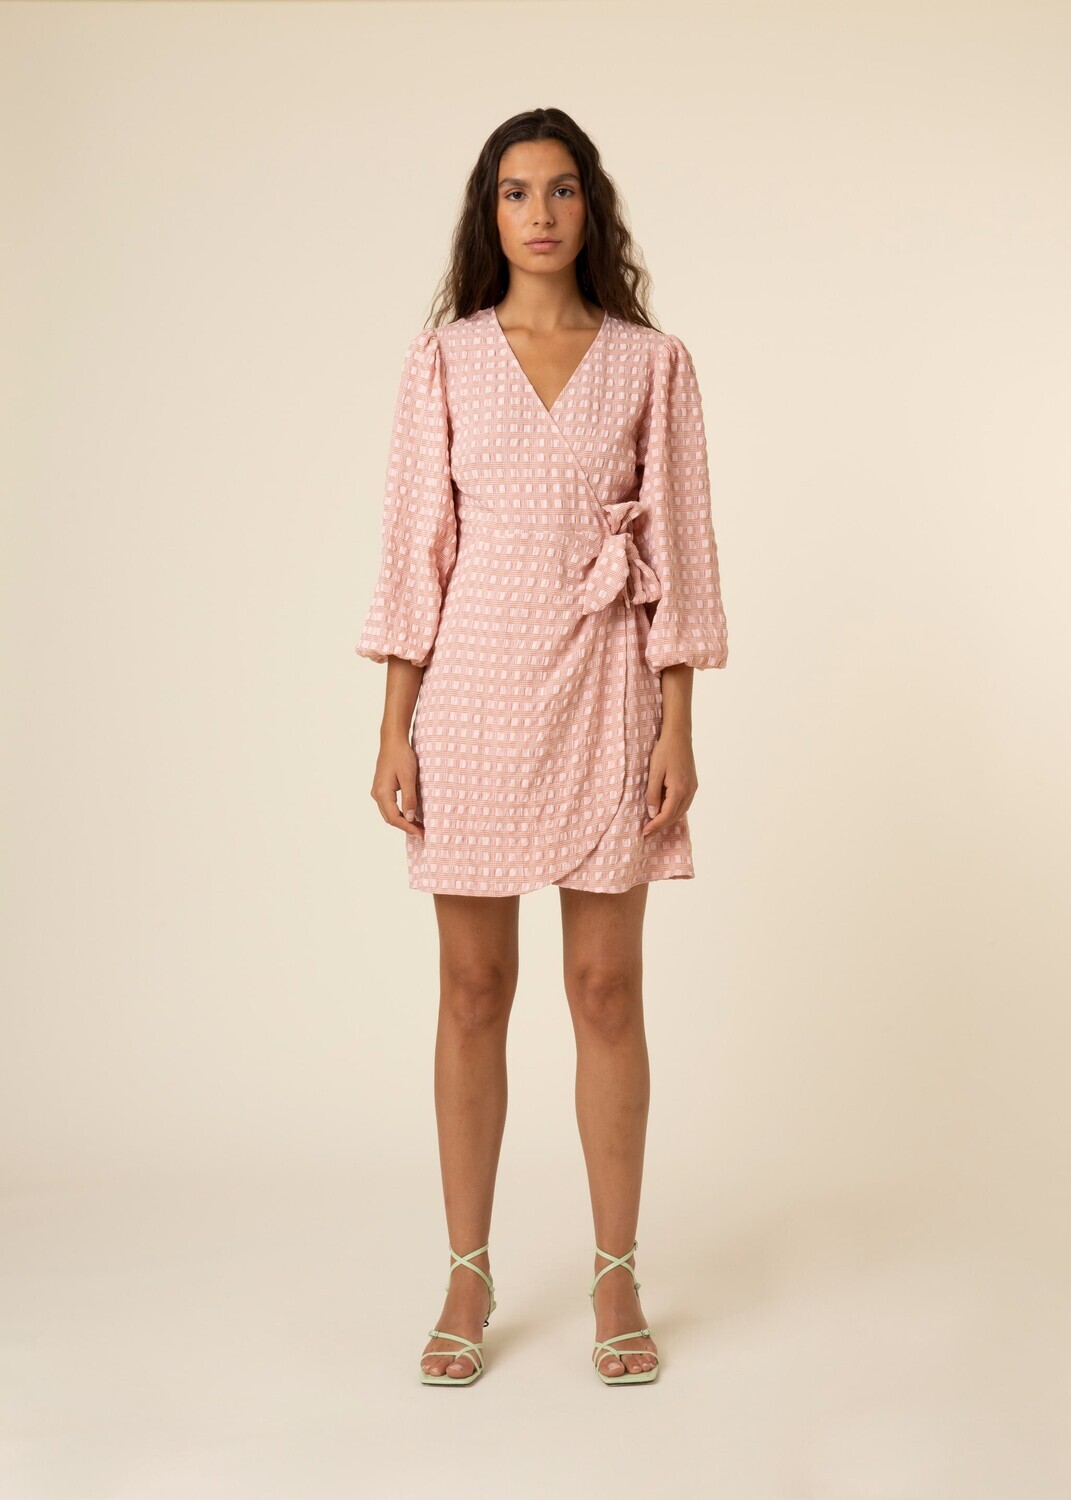 Wrap dress in textured fabric